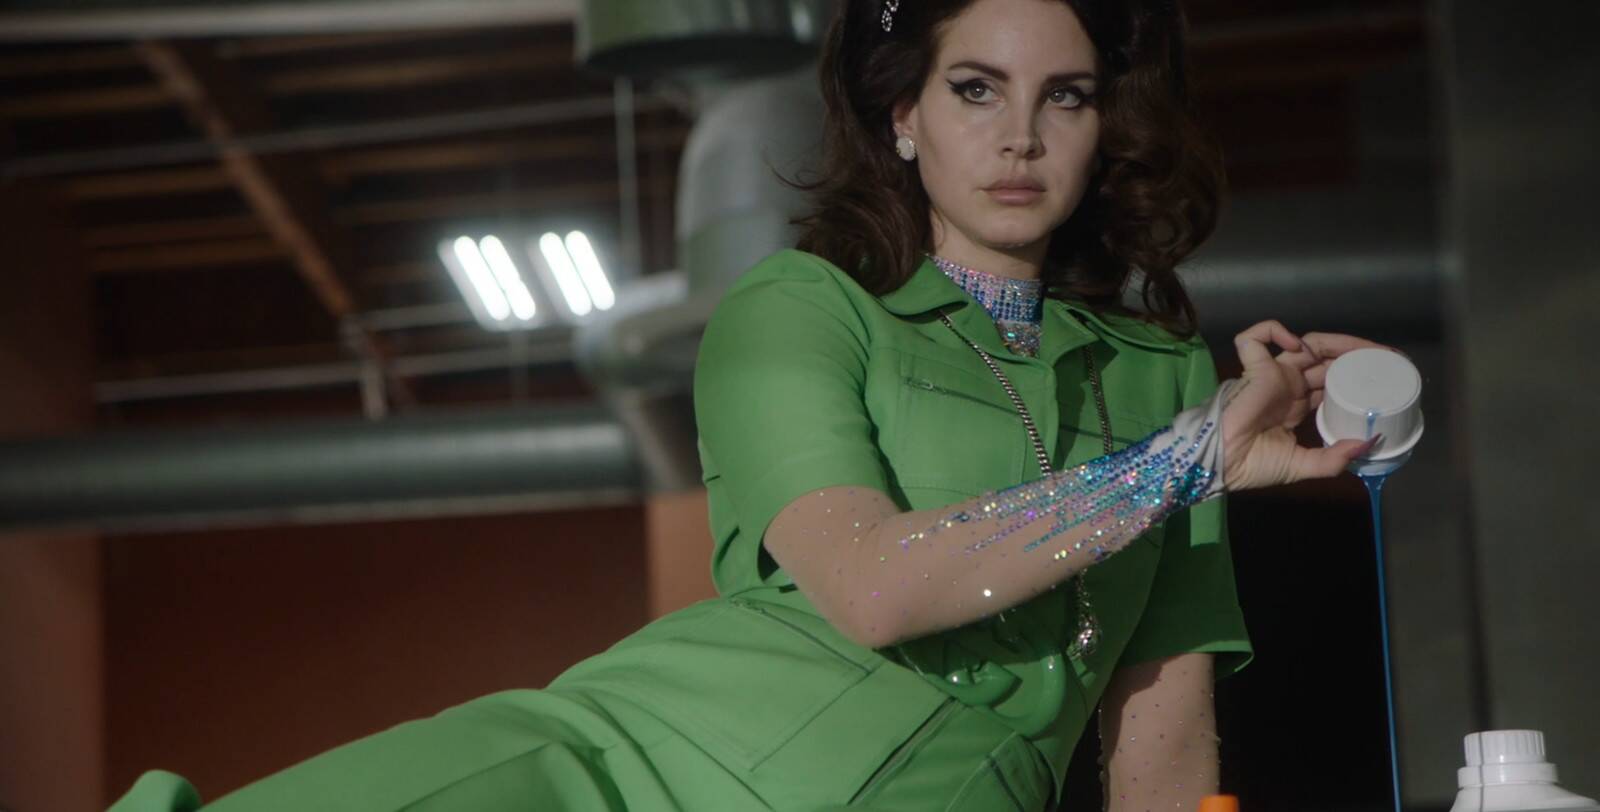 See an interview with Lana Del Rey on the Gucci Guilty fragrance